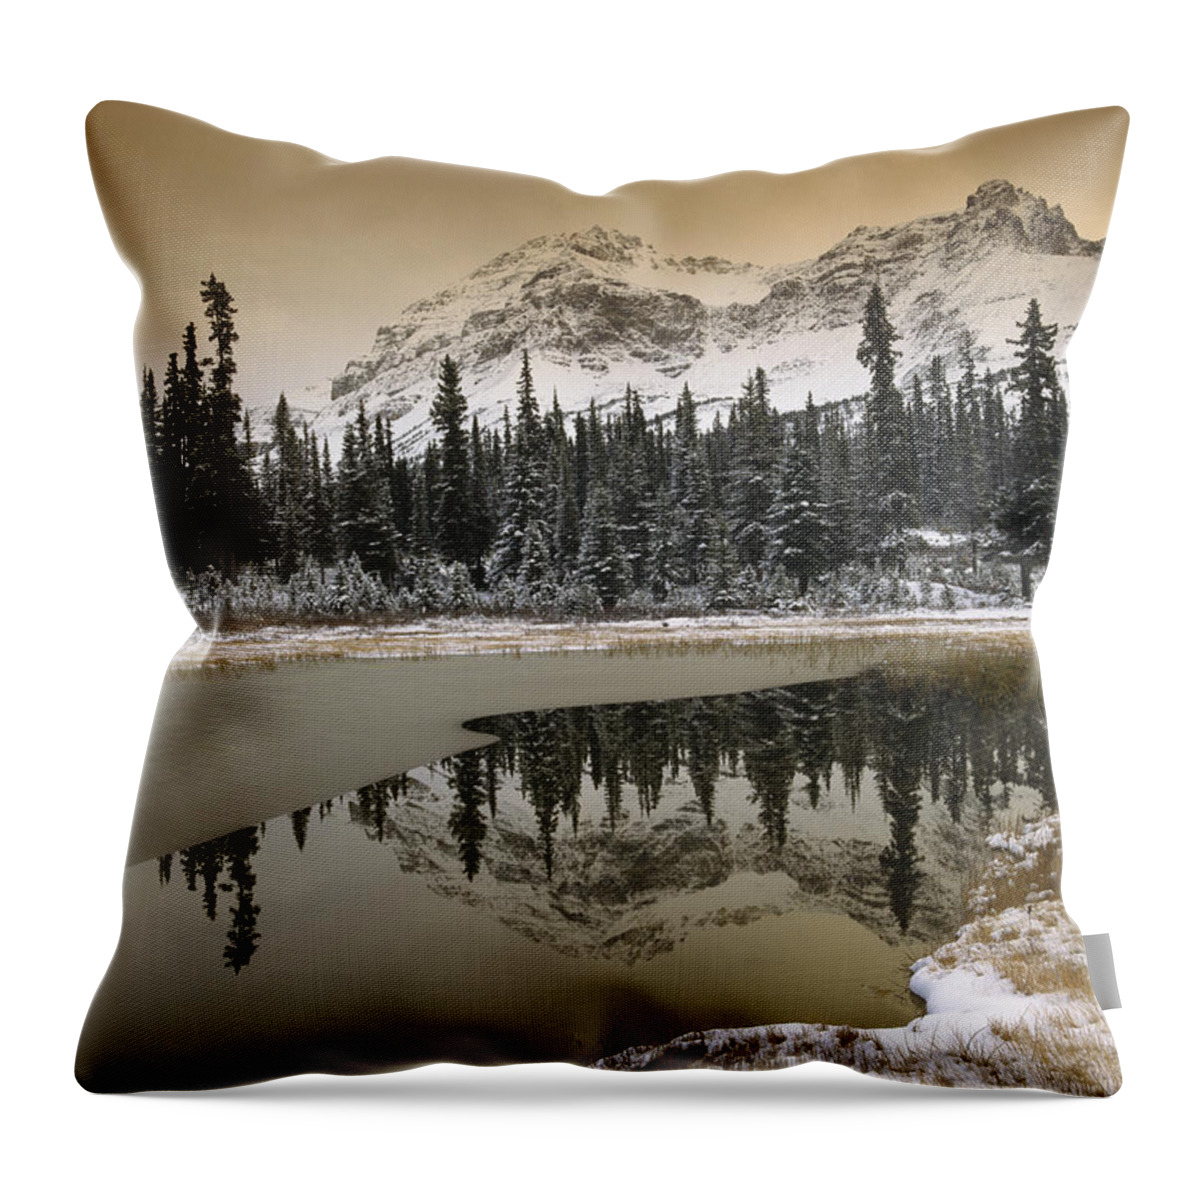 00170867 Throw Pillow featuring the photograph Canadian Rocky Mountains Dusted In Snow by Tim Fitzharris